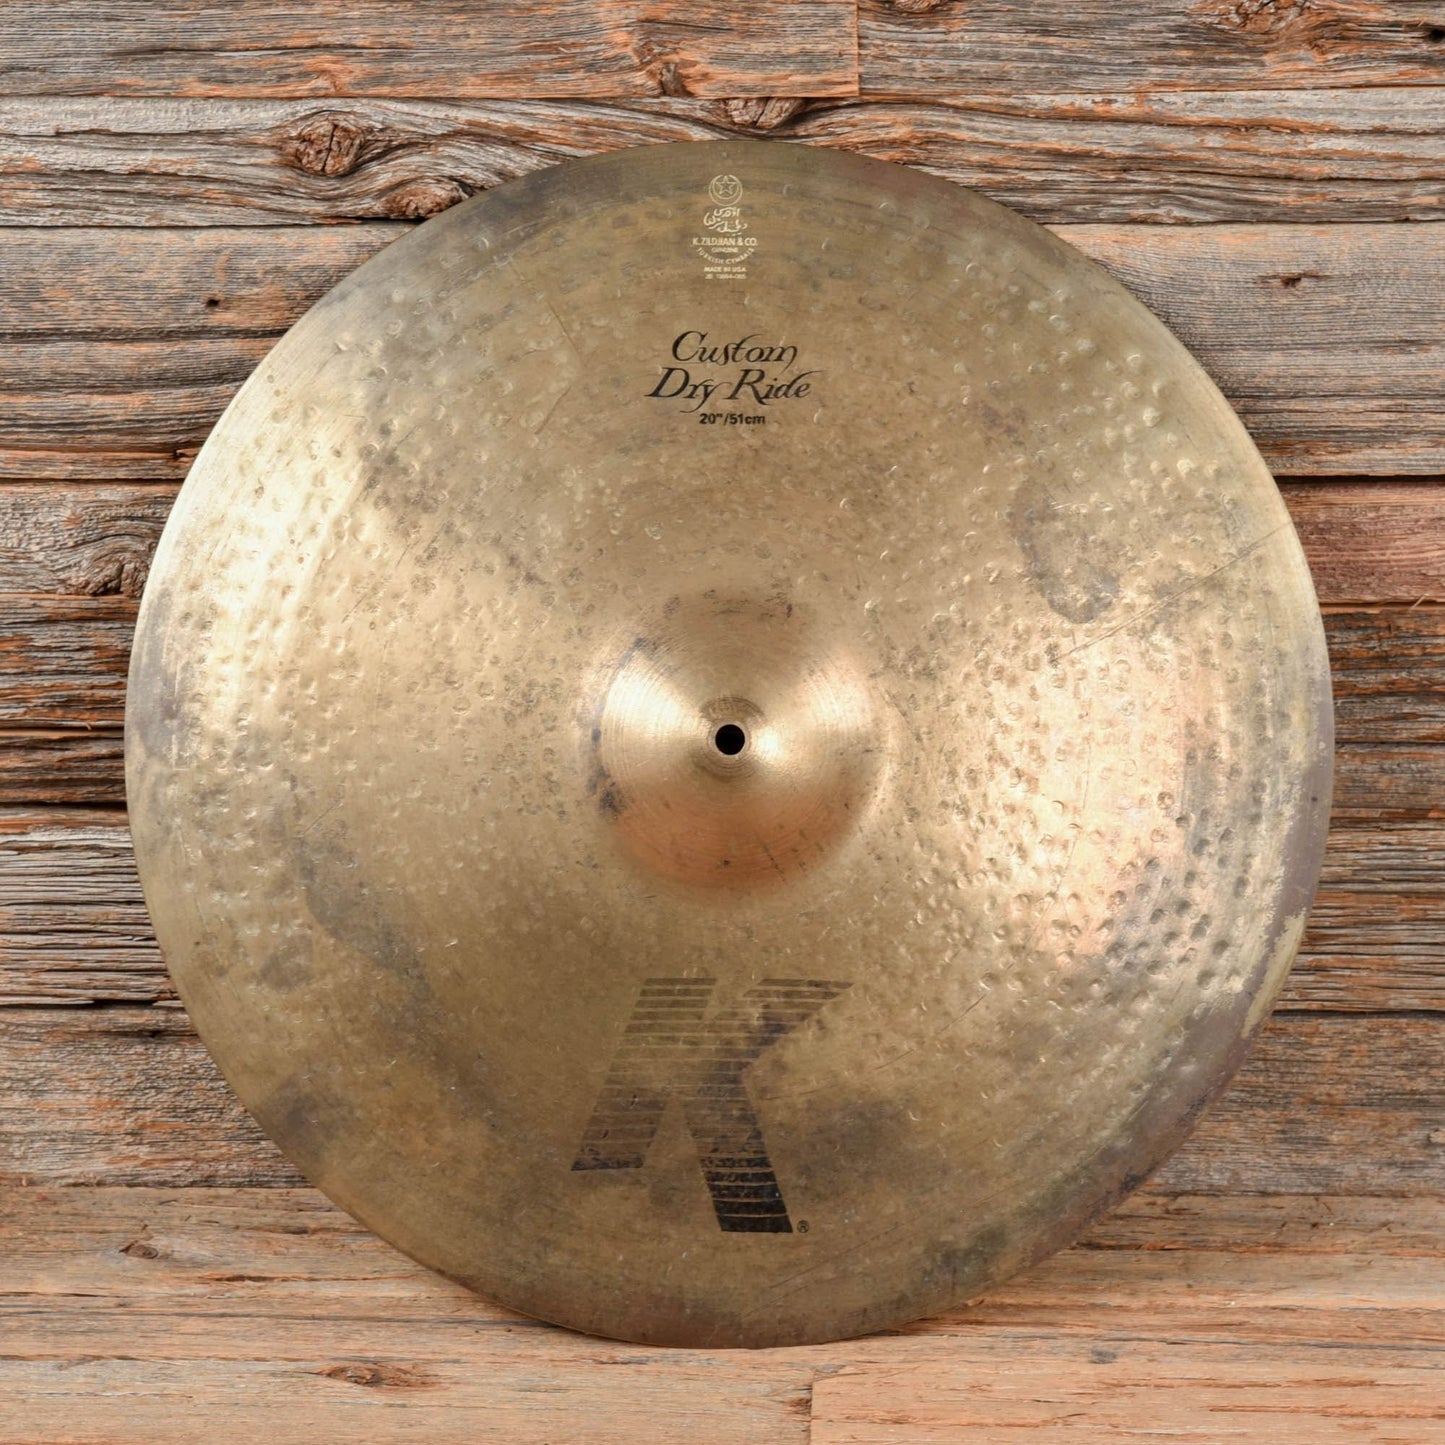 Zildjian 20" Custom Dry Ride Cymbal USED Drums and Percussion